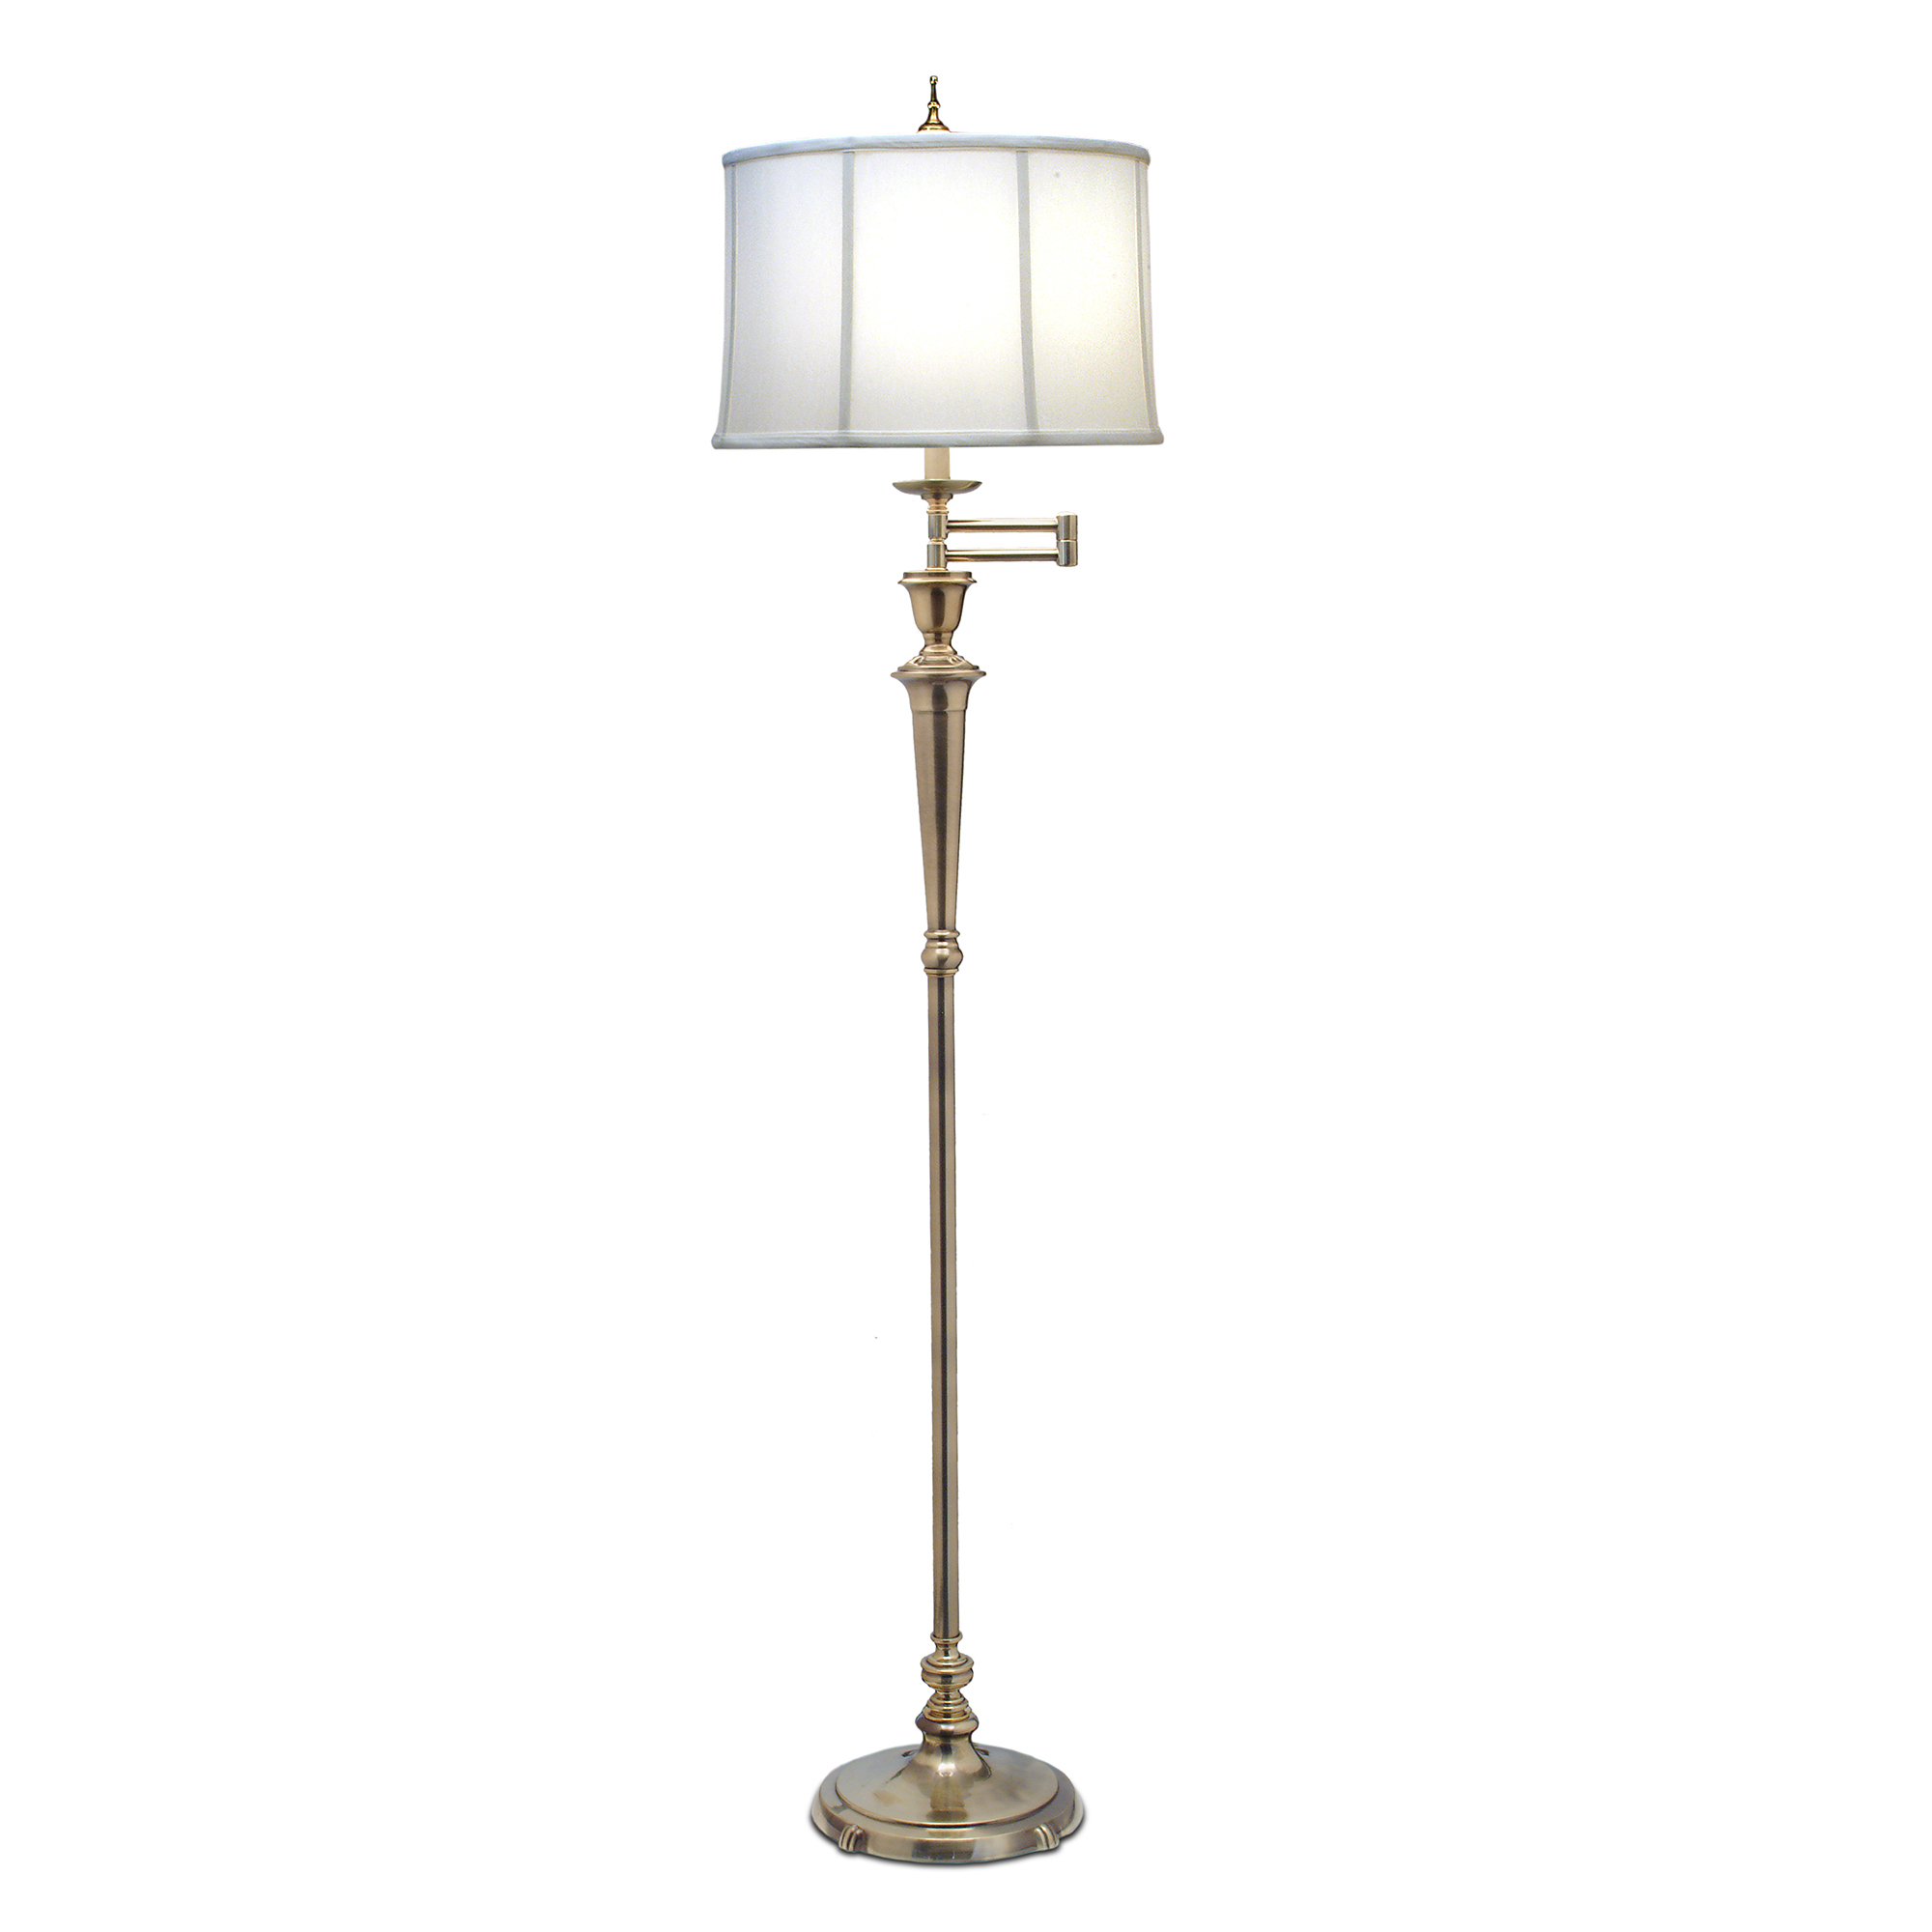 Details About Stiffel Arlington Swing Arm Floor Lamp Burnished Brass 1 X 60w E27 220 240v 50hz throughout proportions 2000 X 2000